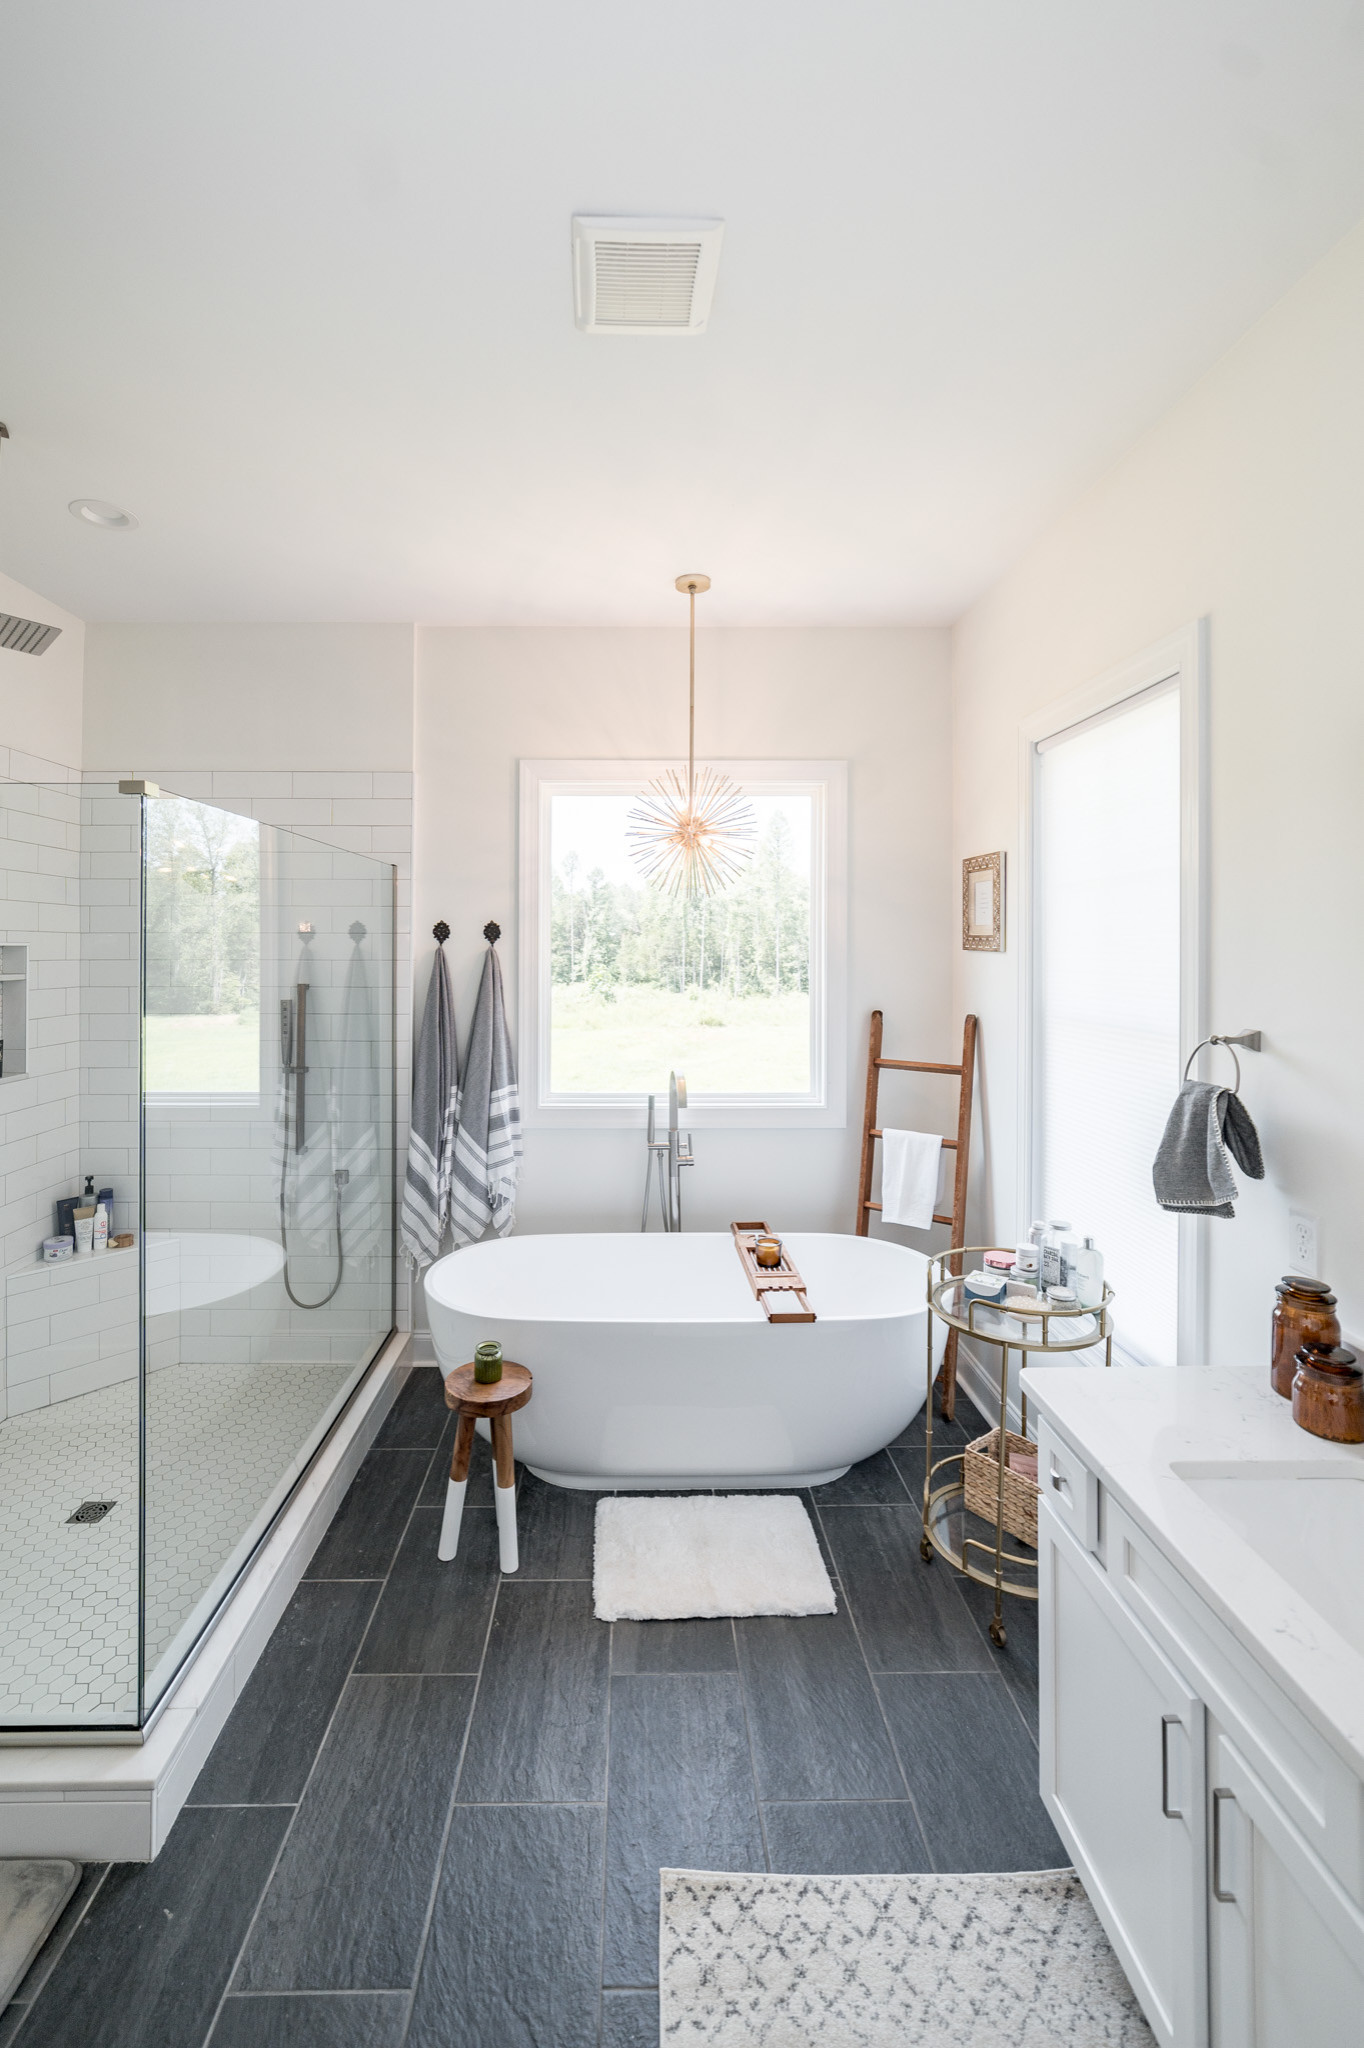 Black and white offers timeless bathroom decor